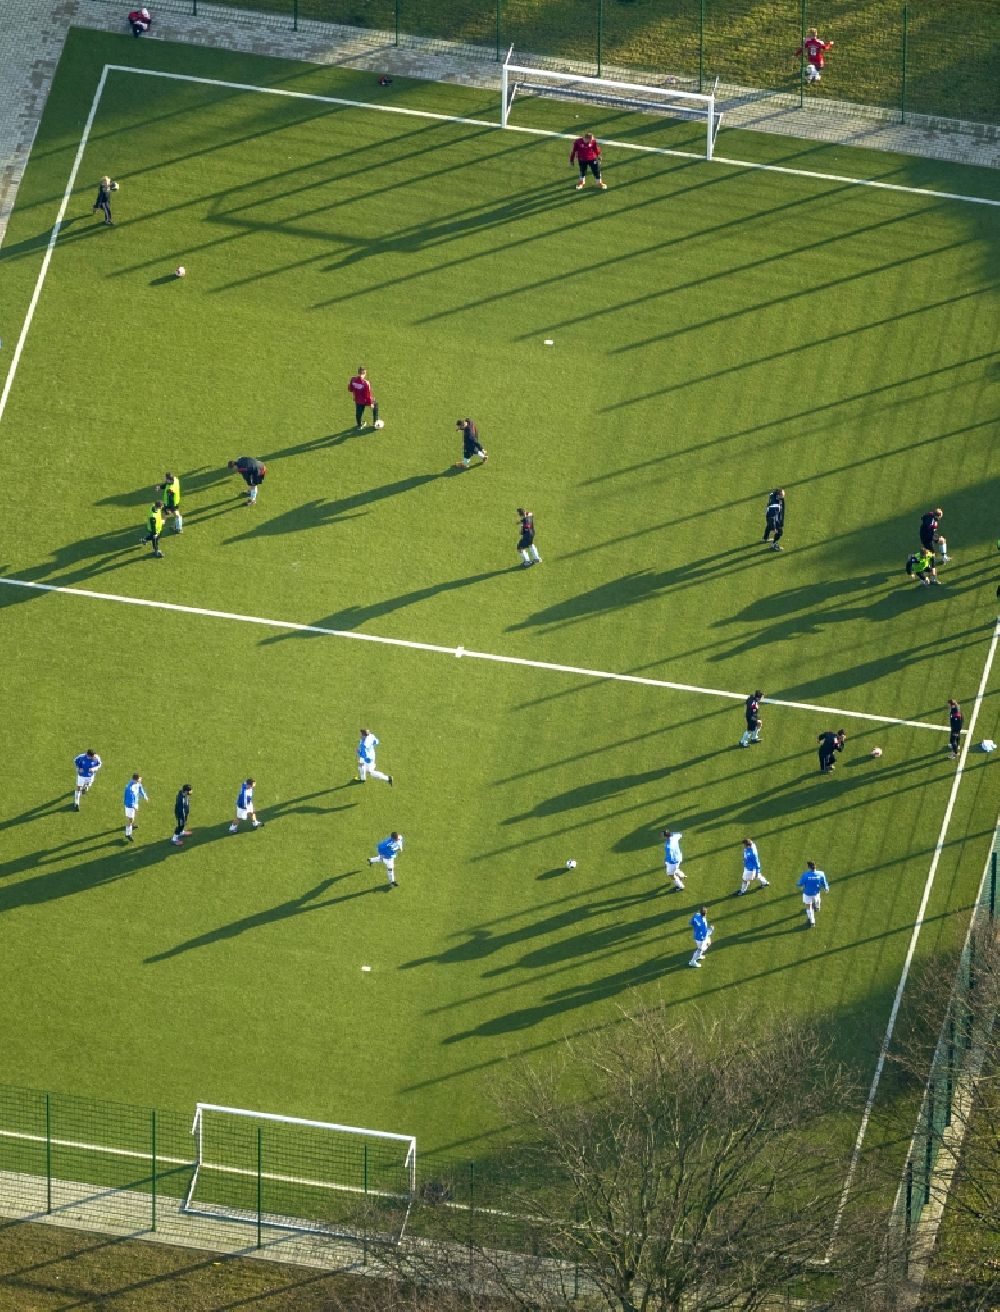 Dortmund from above - View of a Football game on a football field - artificial pitch in Dortmund in North Rhine-Westphalia